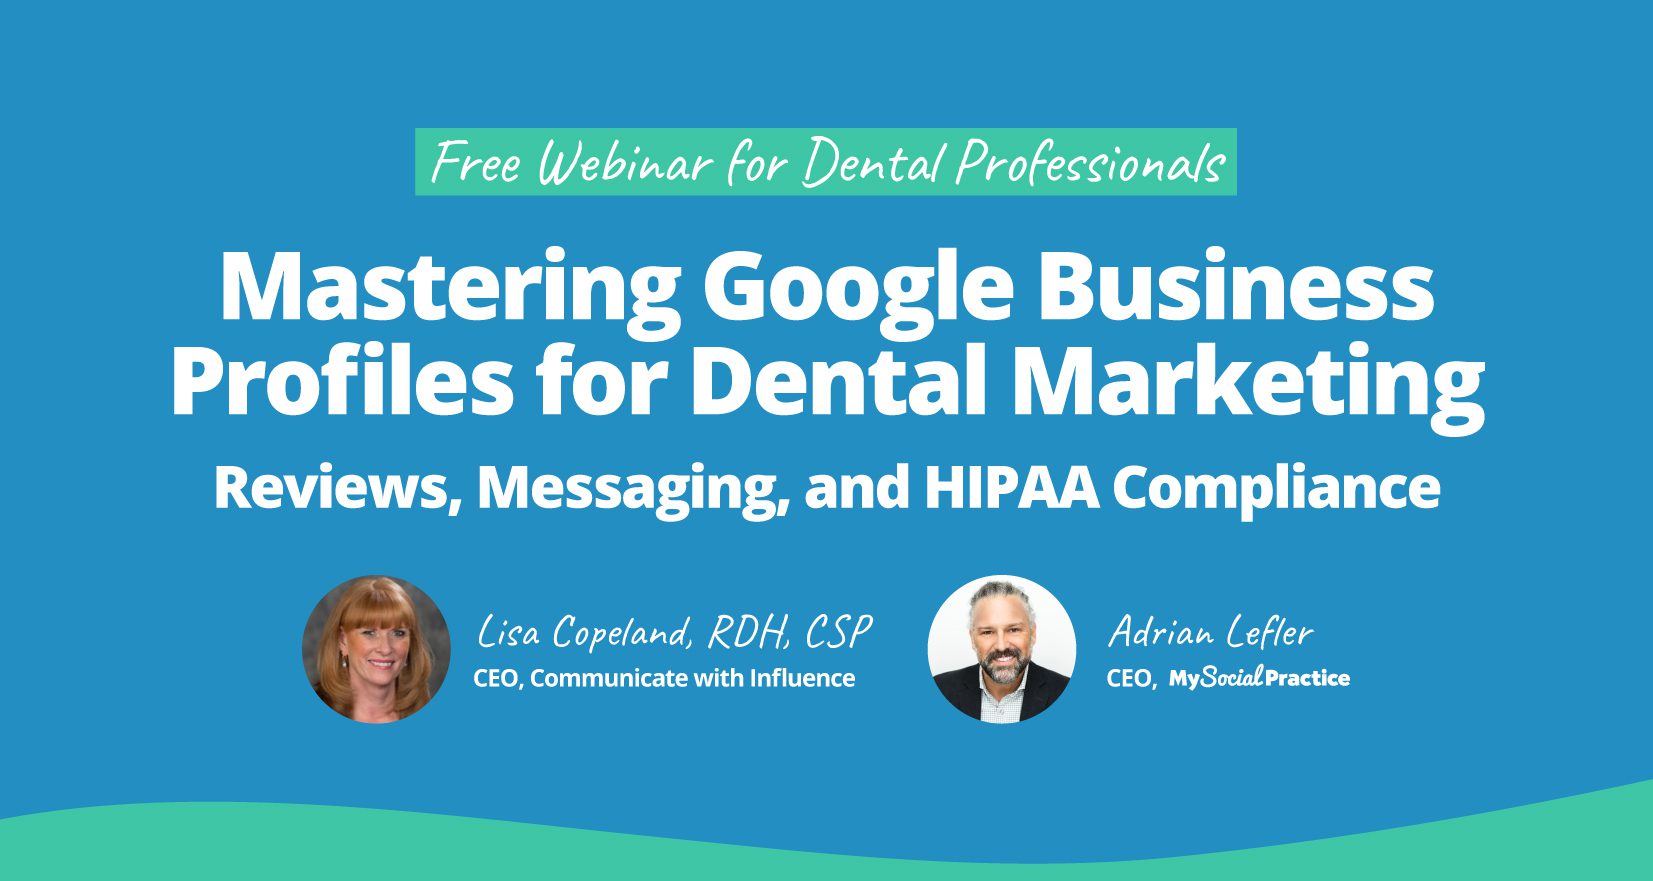 My Social Practice - Social Media Marketing for Dental & Dental Specialty Practices - how to get more google reviews